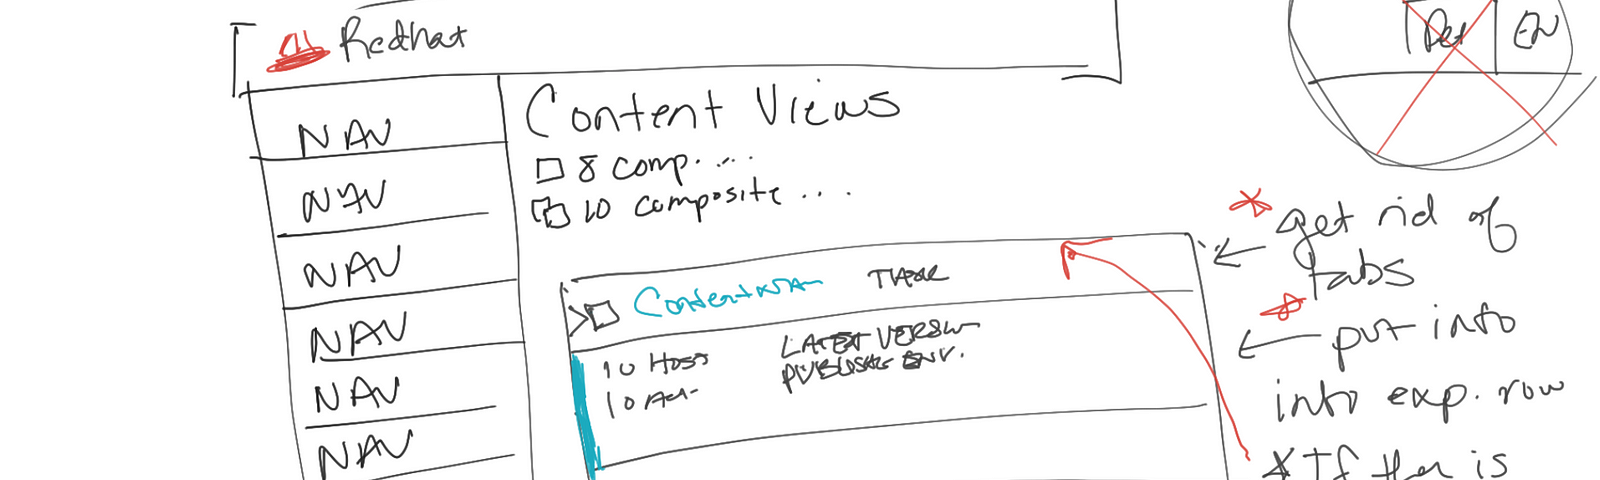 A screenshot of a collaborative Jamboard session showing content views and annotations made during the discussion